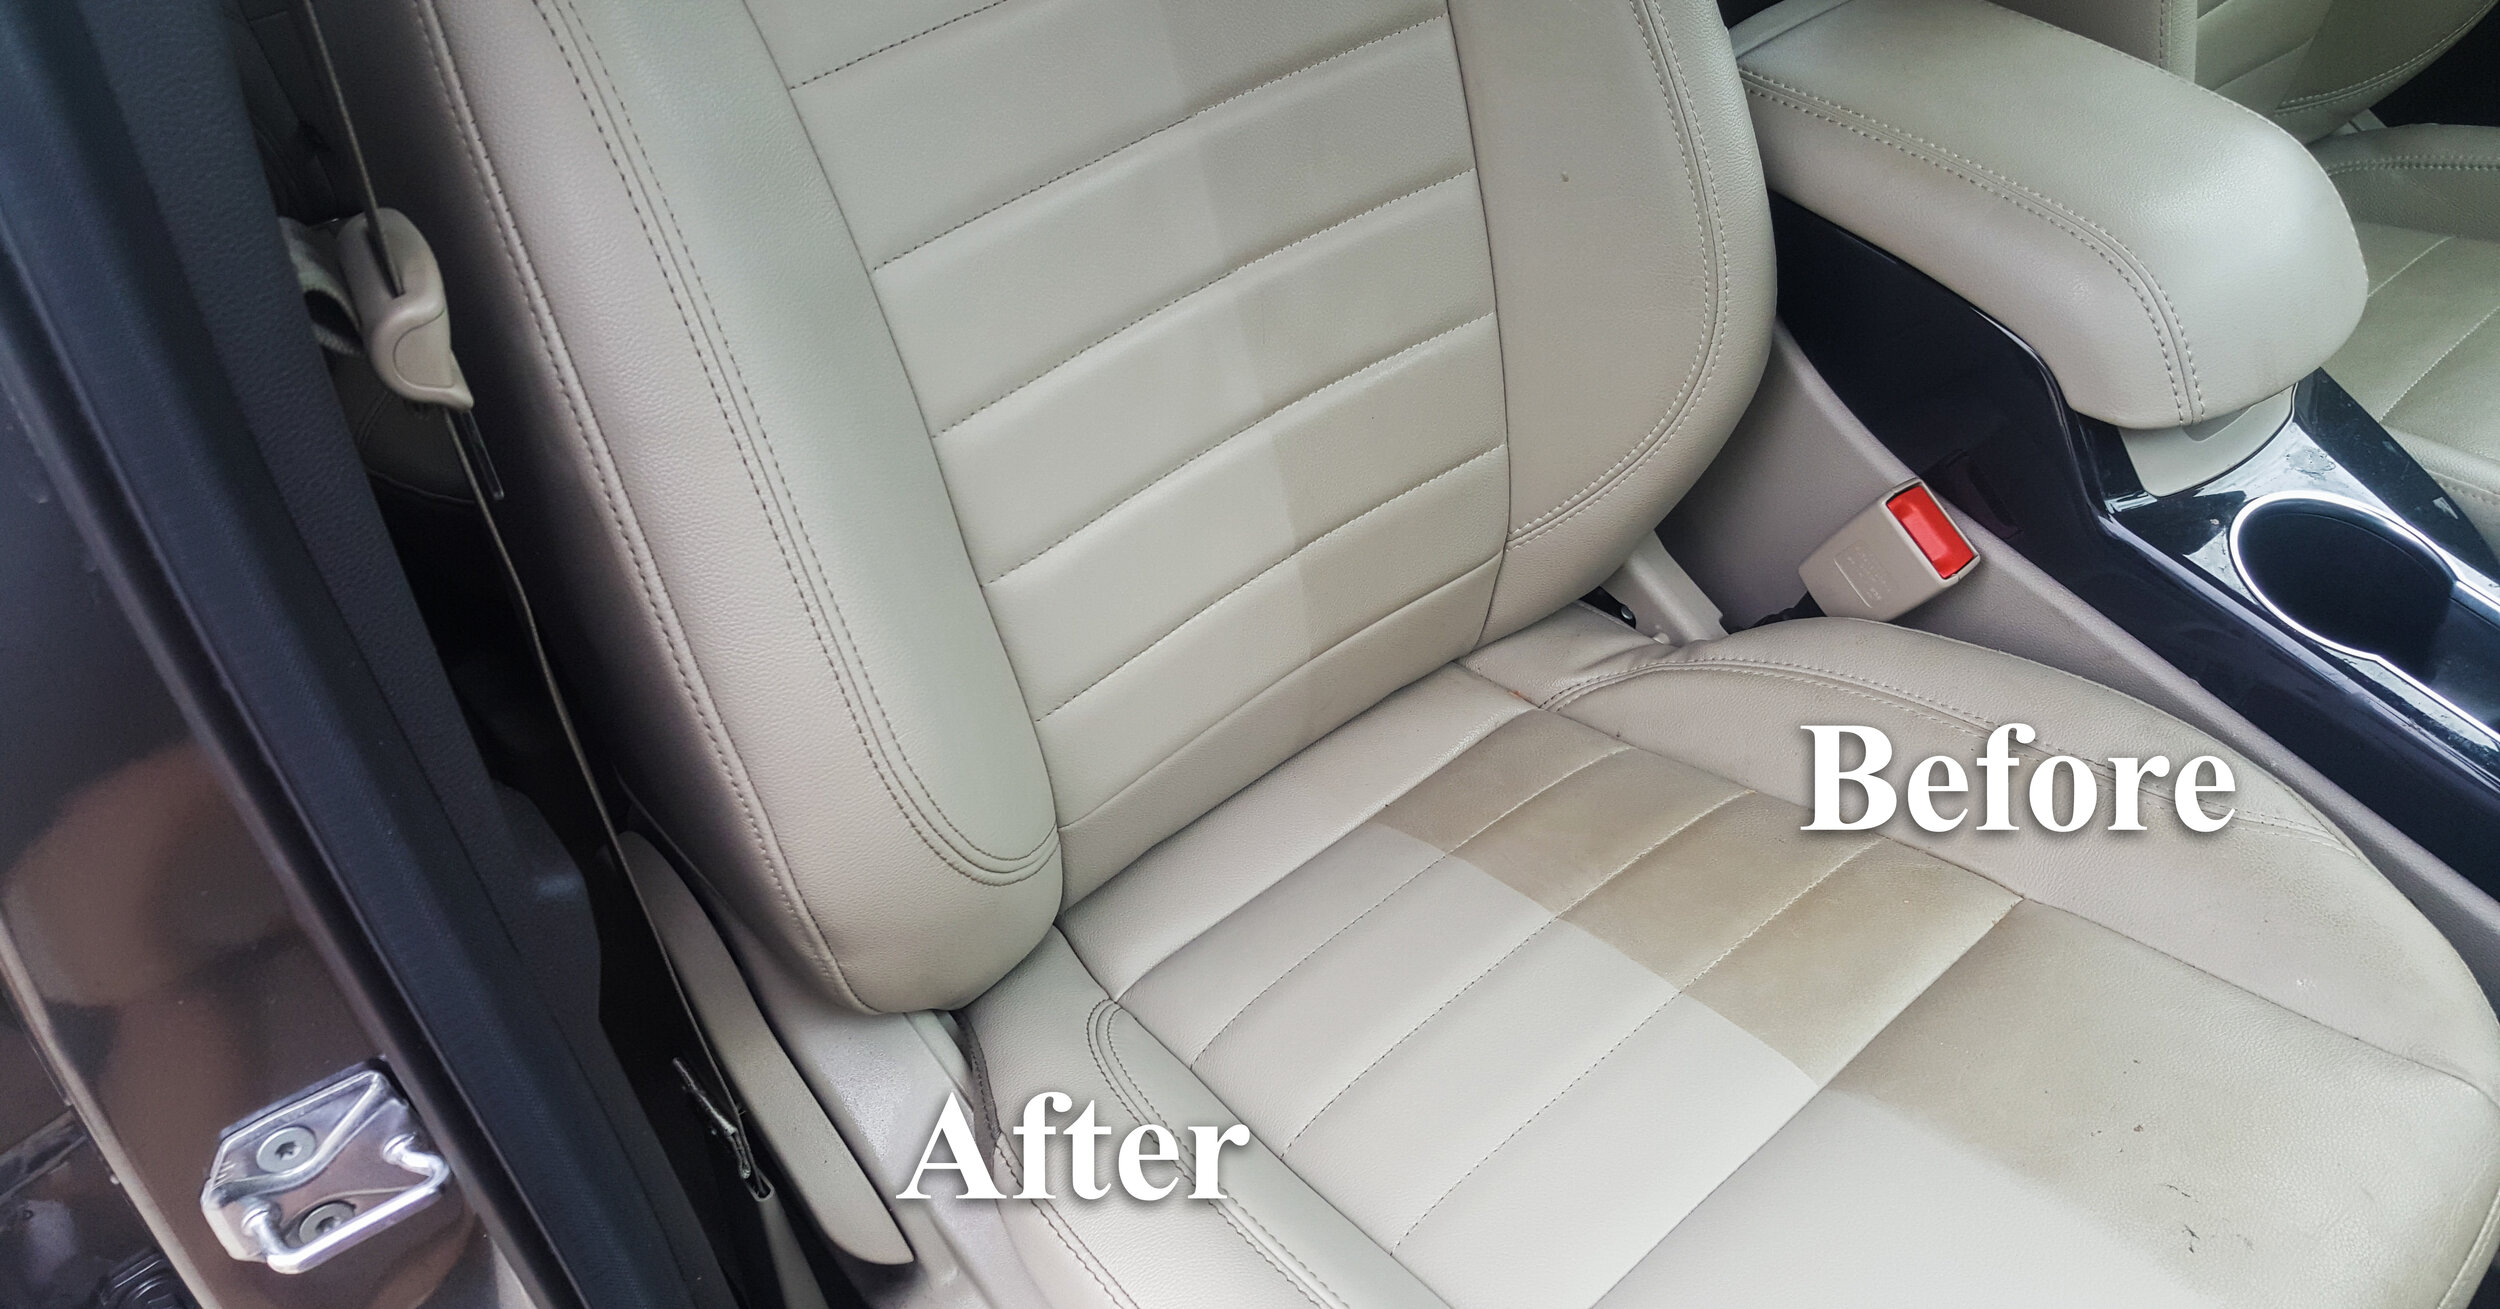 How To Clean Leather Car Seats At Home, What Is The Best Way To Clean Leather Car Seats